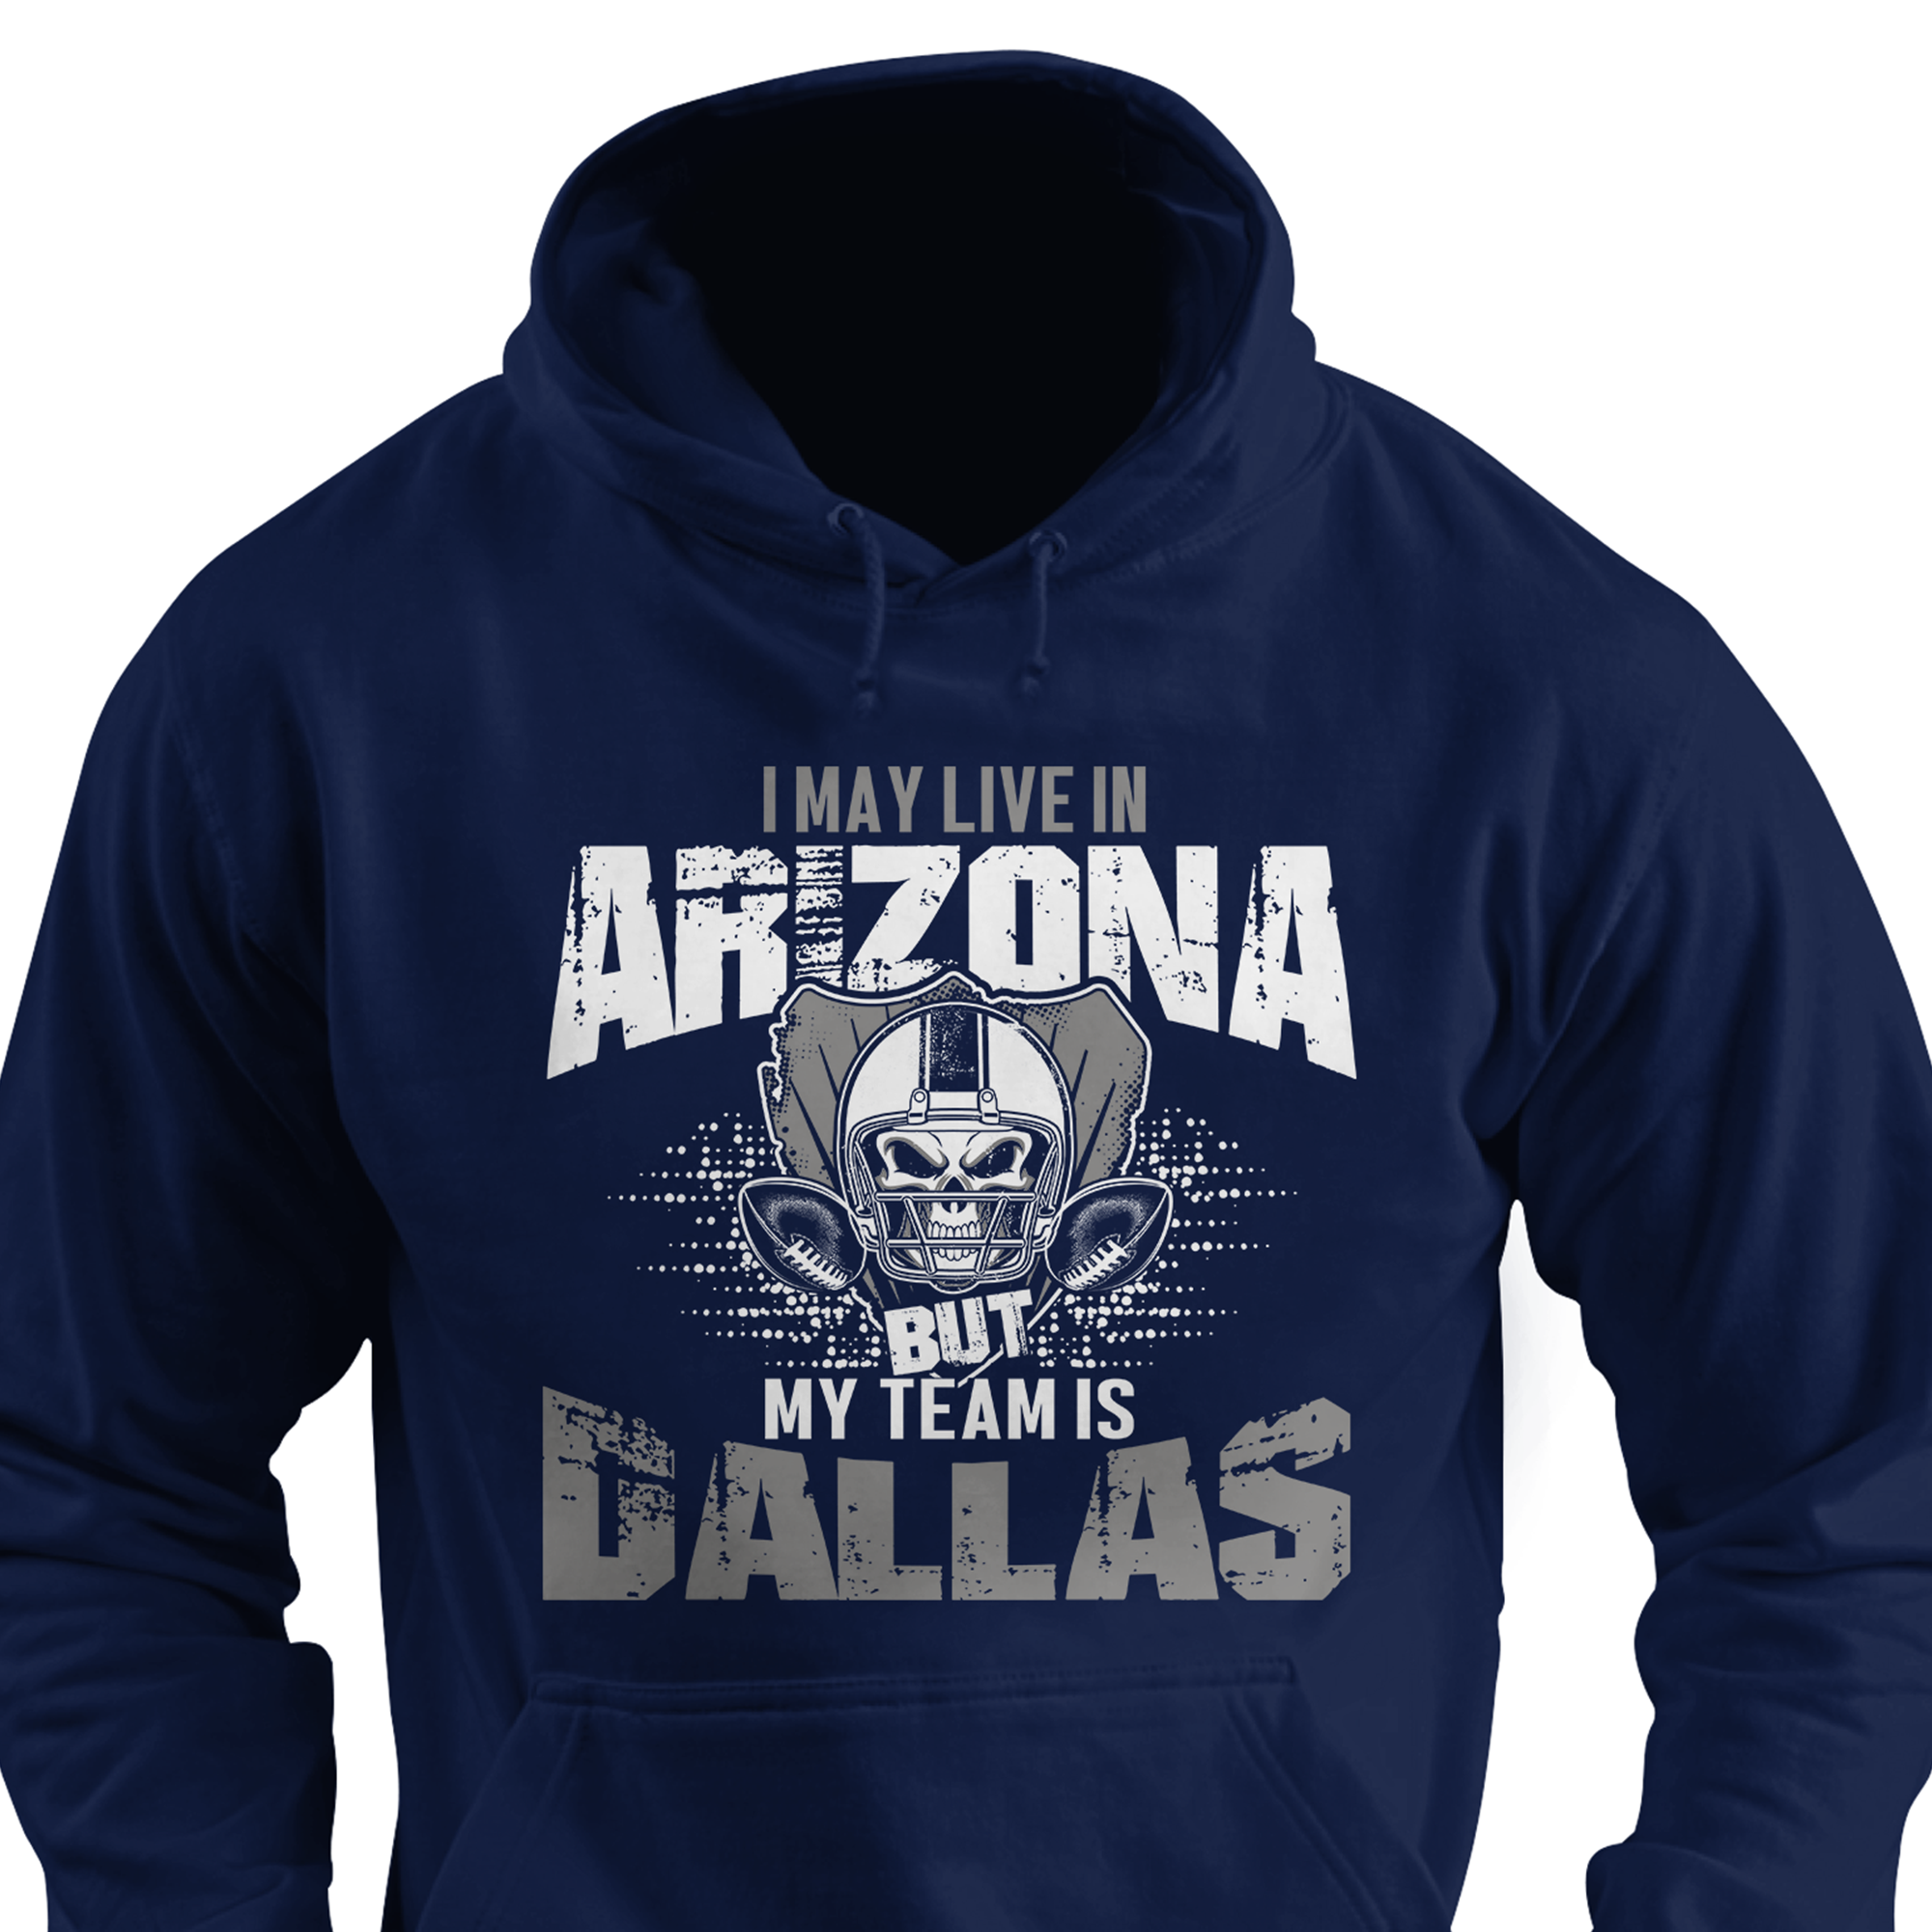 I may live in Arizona but my team is Dallas